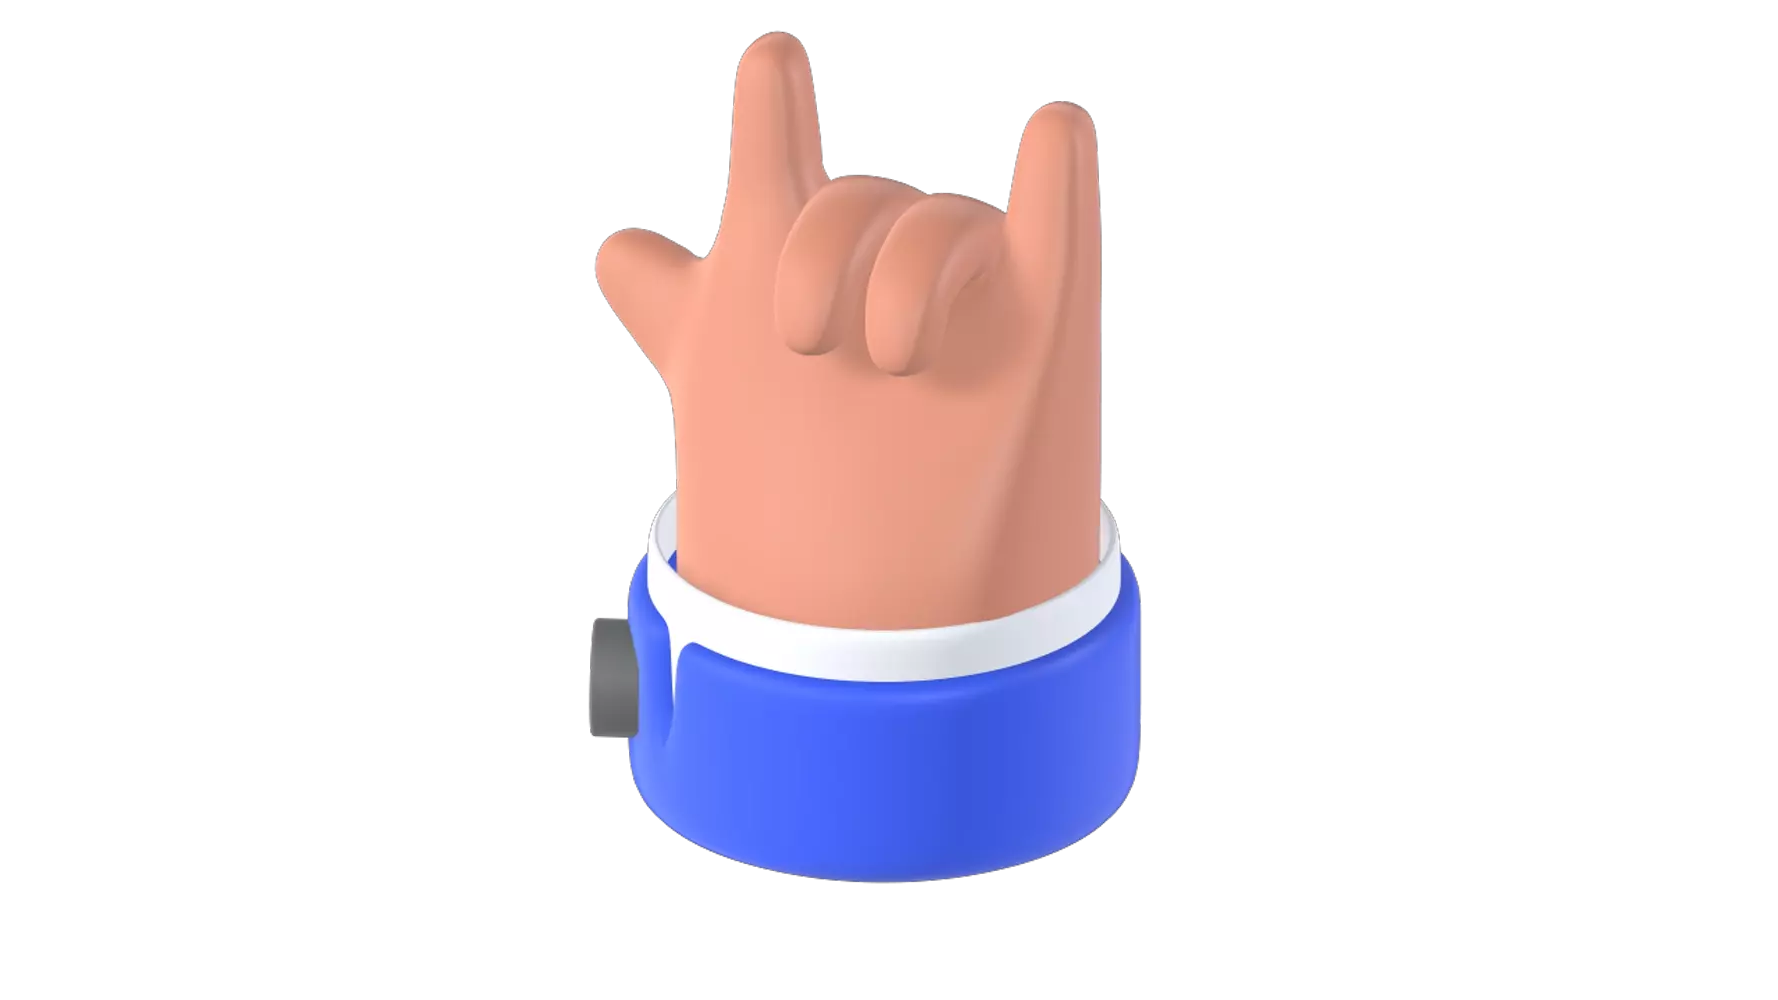 Rock Hand 3D Graphic